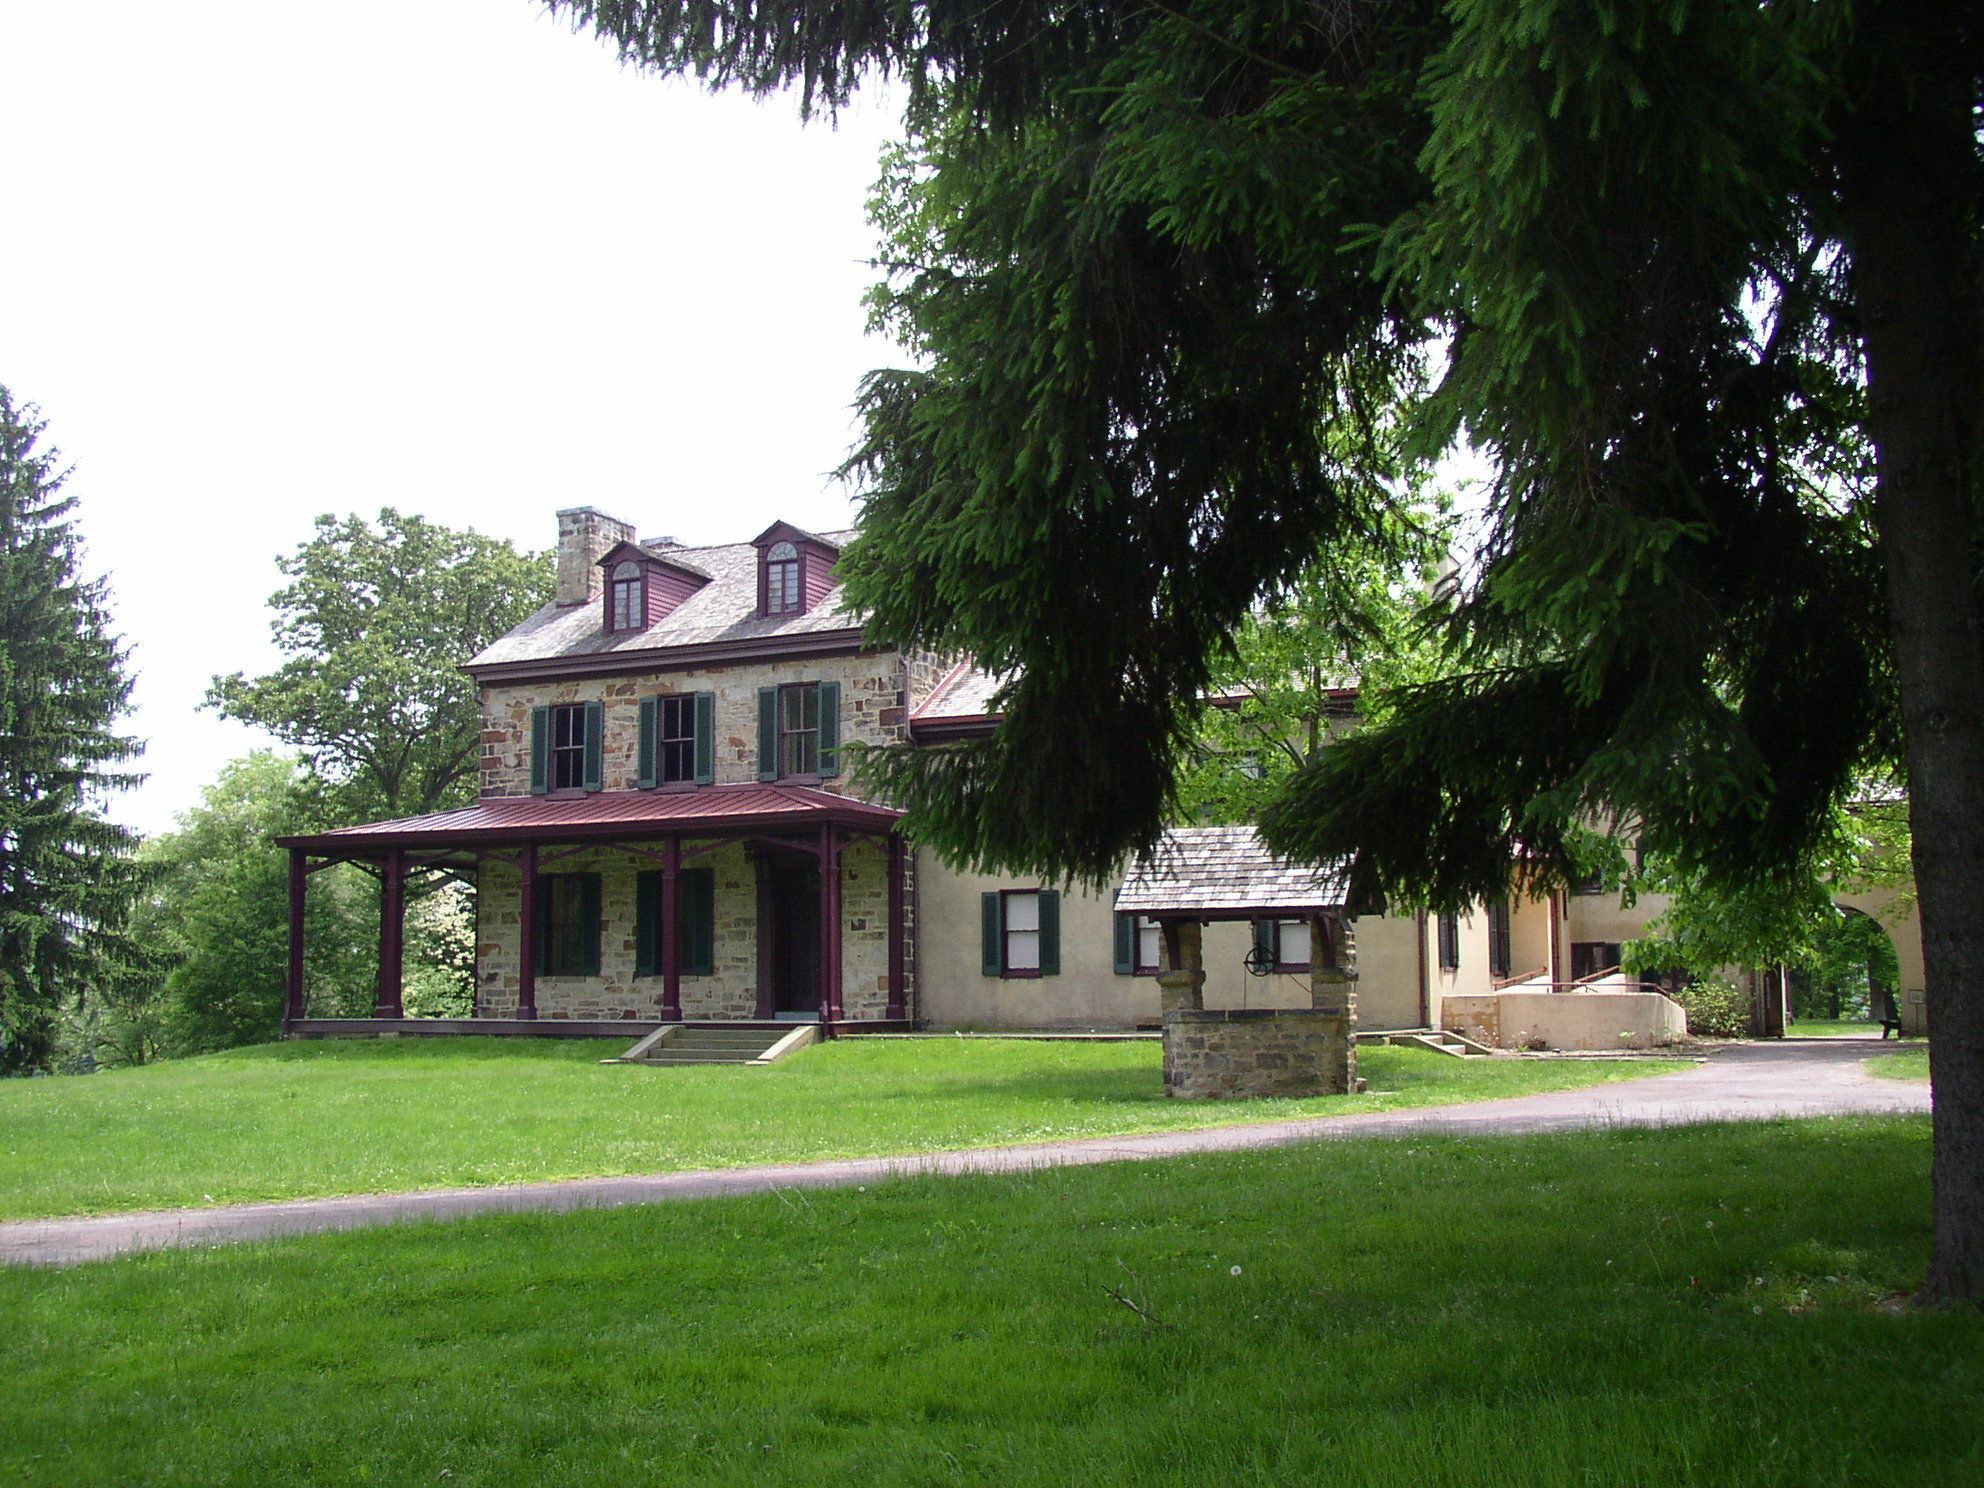 Friendship Hill was the country home of Albert Gallatin